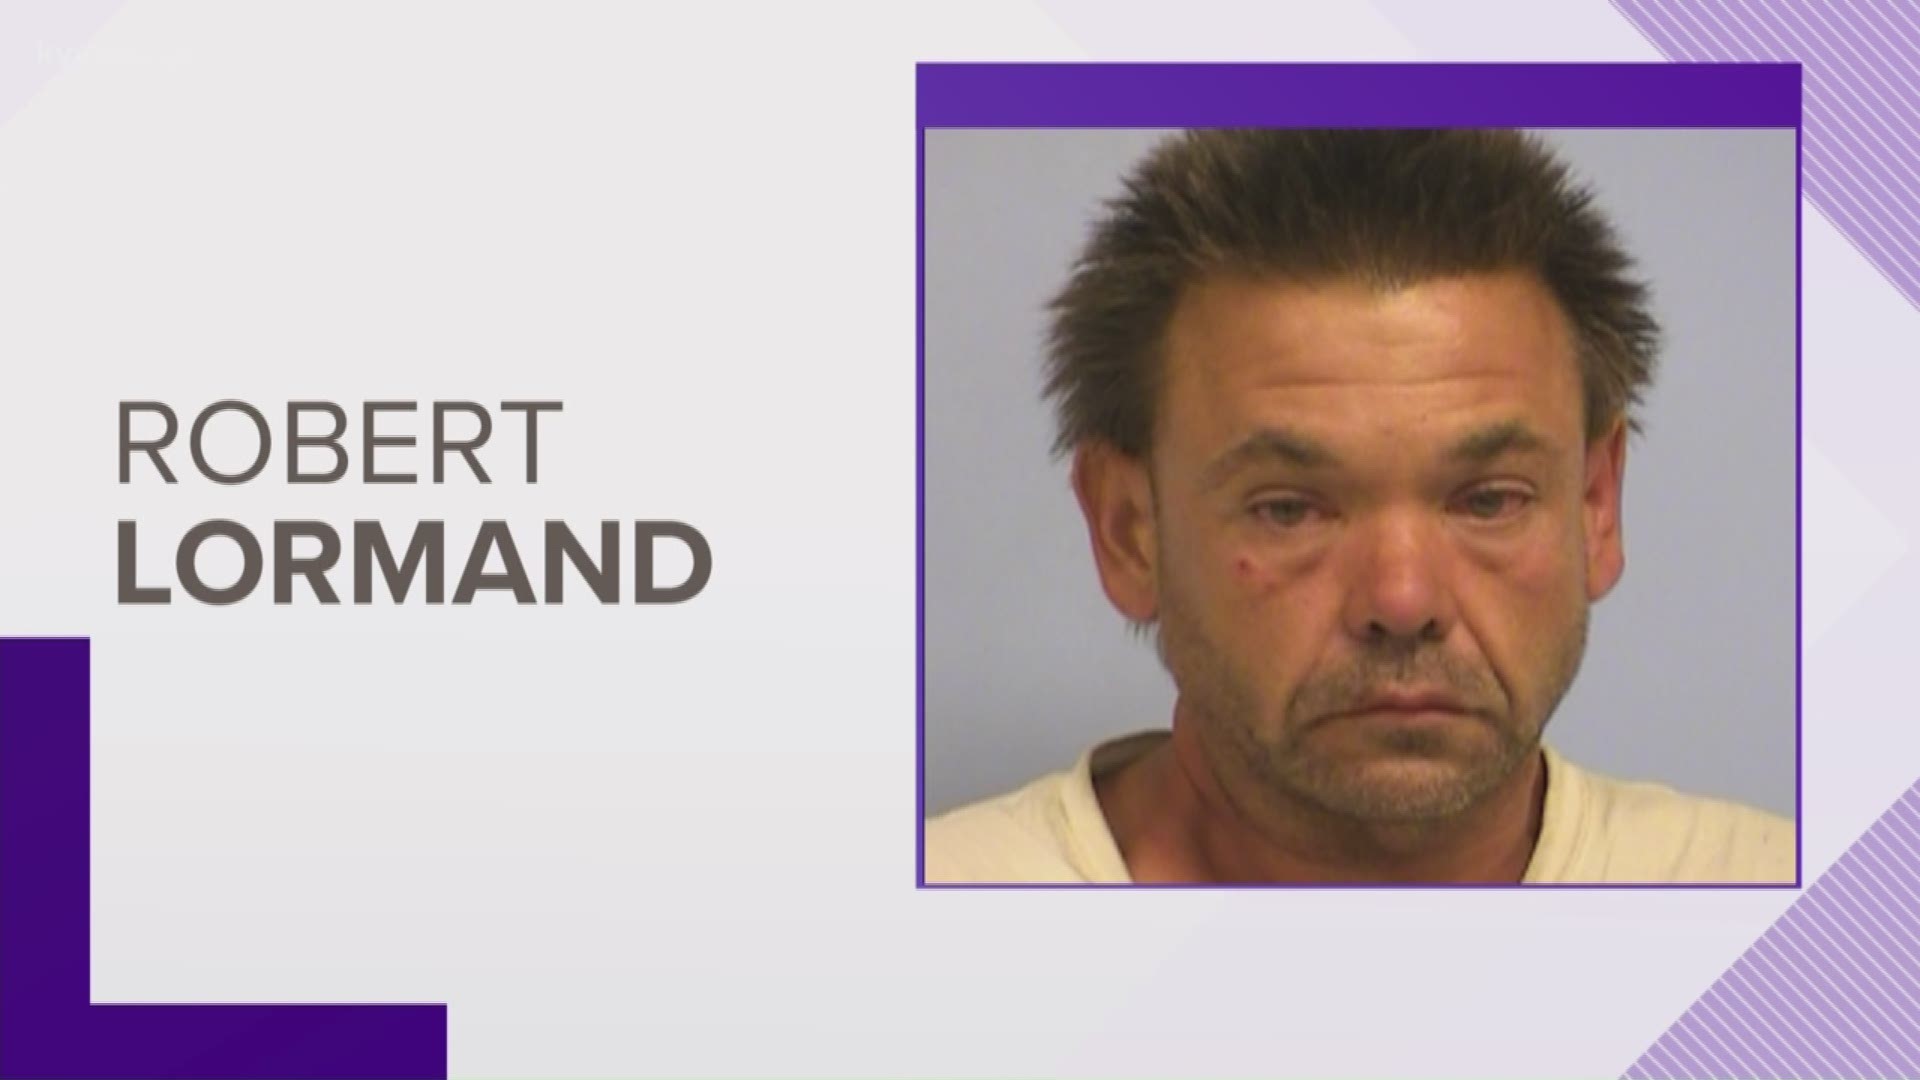 A man accused of attacking a woman on the Blunn Creek Greenbelt has been arrested on kidnapping charges.